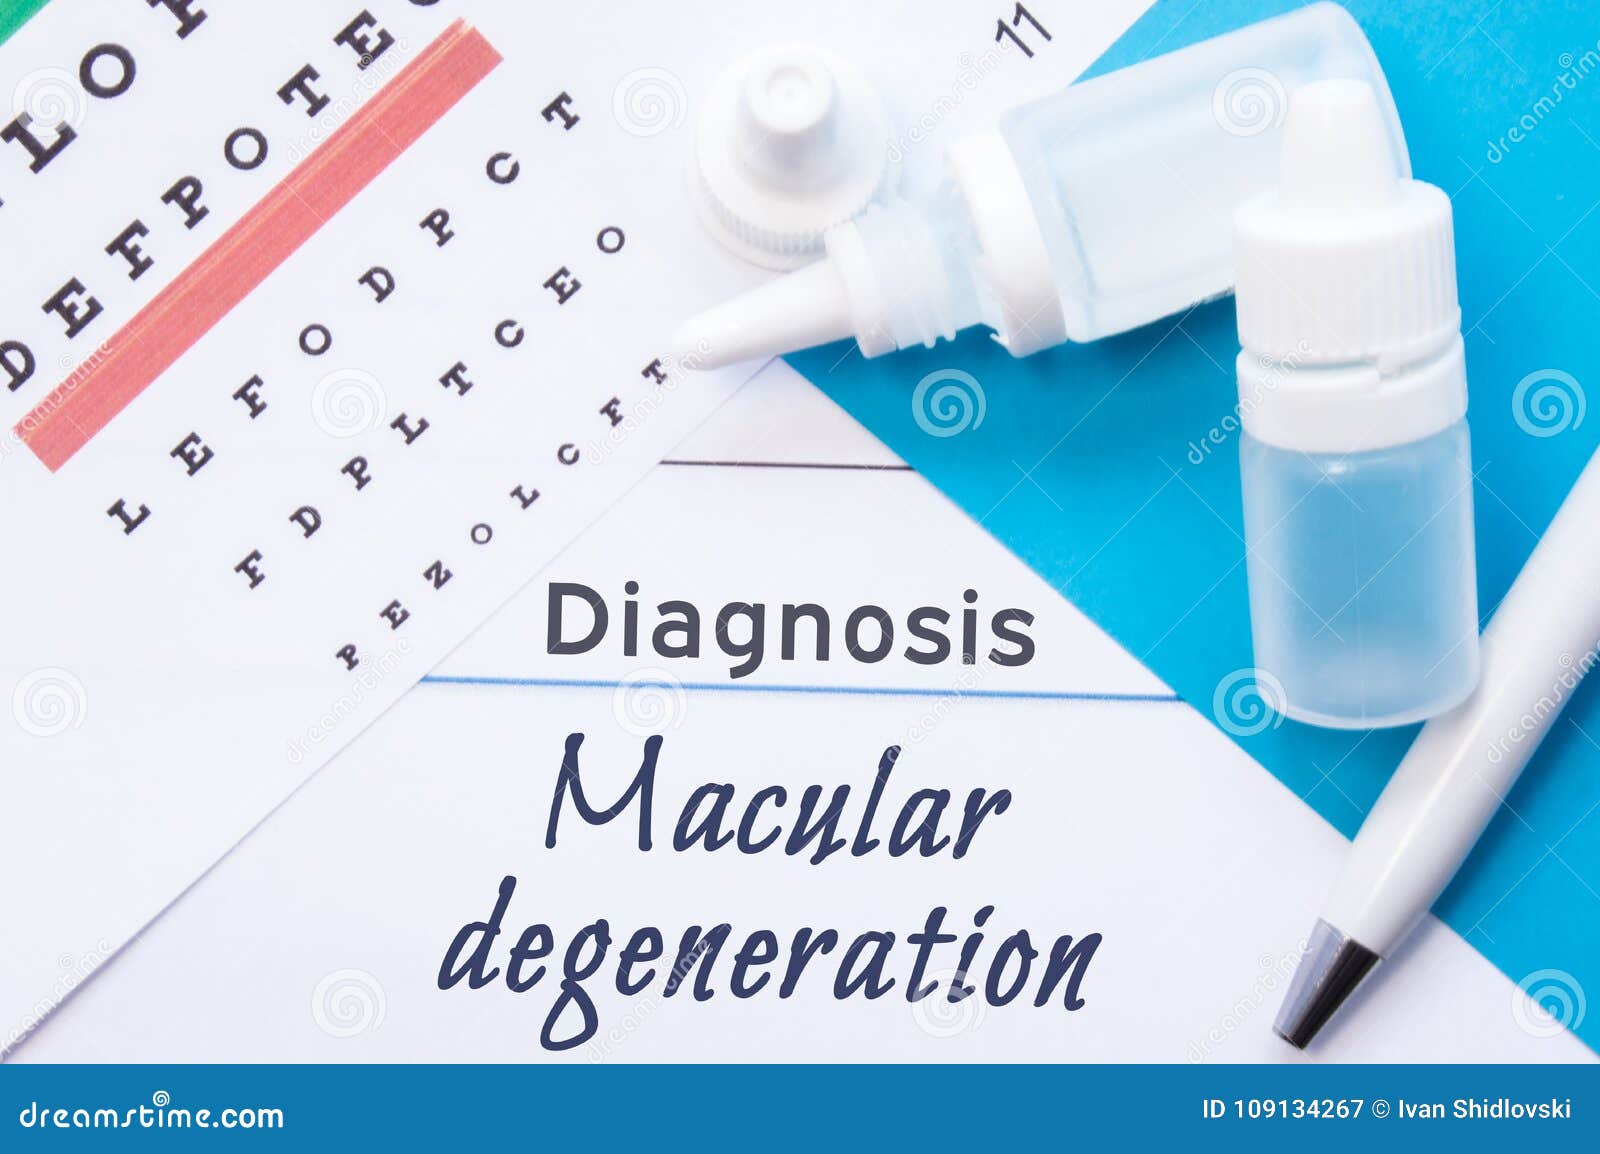 ophthalmology diagnosis macular degeneration. snellen eye chart, two bottles of eye drops medications lying on note with inscr